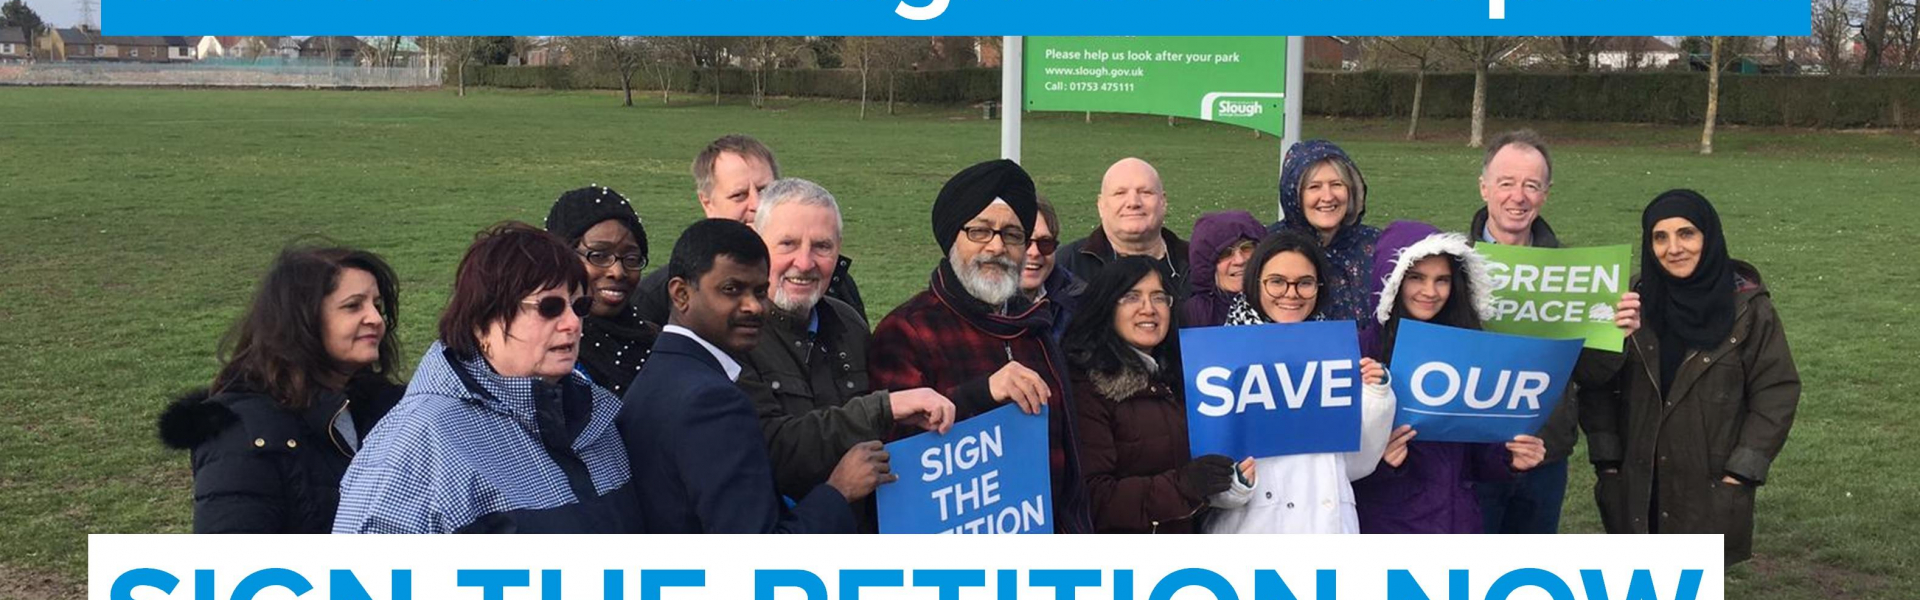 Save Our Slough Green Spaces